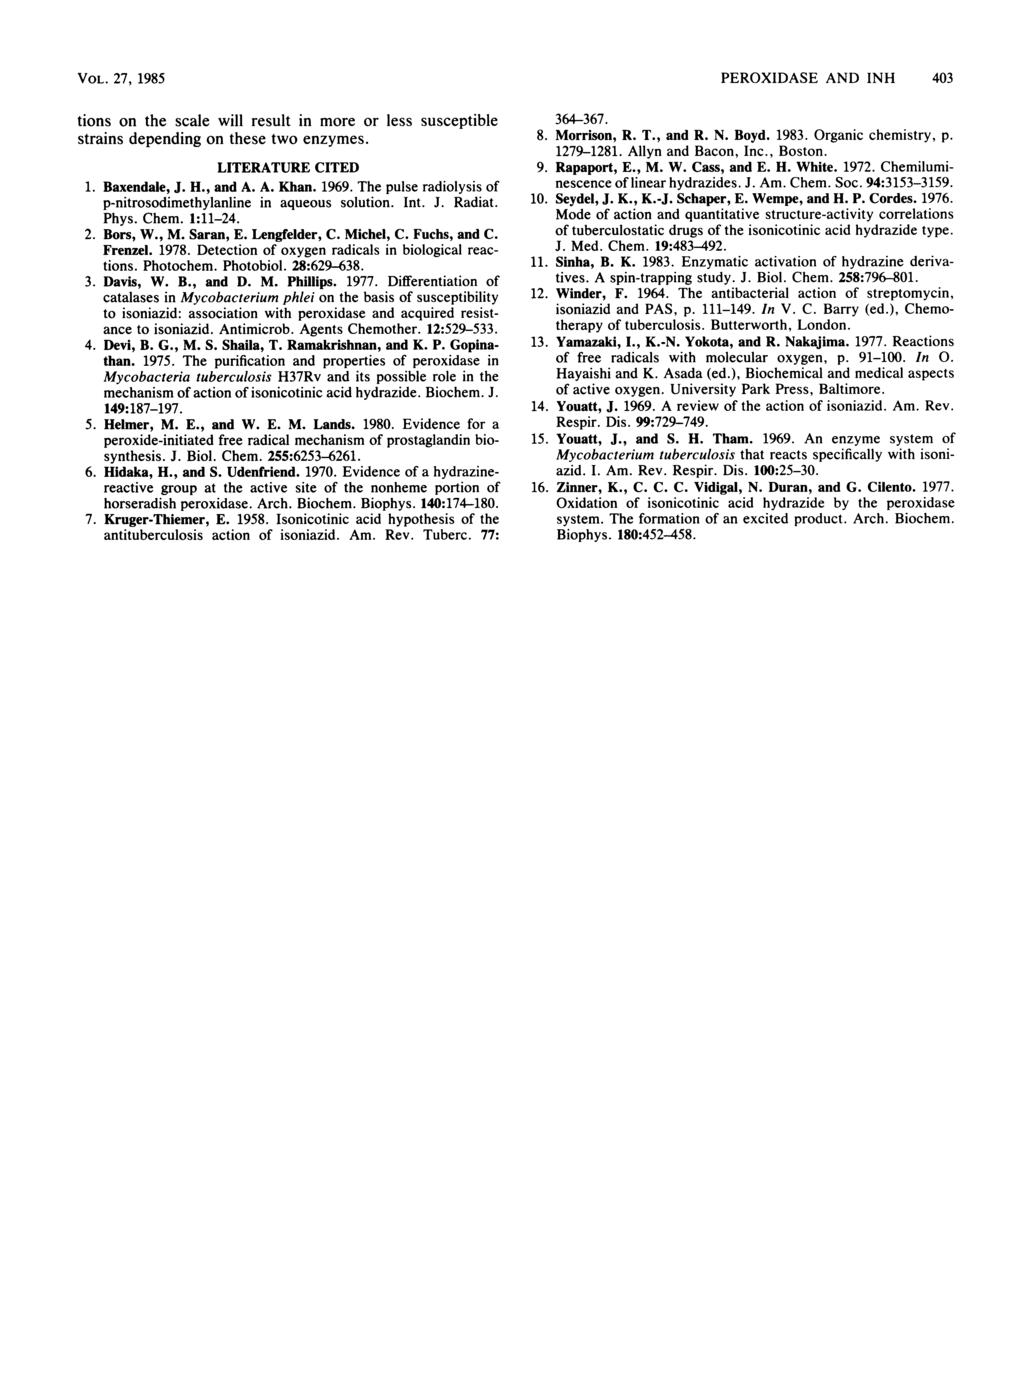 VOL. 27, 1985 tions on the scale will result in more or less susceptible strains depending on these two enzymes. LTERATURE CTED 1. Baxendale, J. H., and A. A. Khan. 1969.